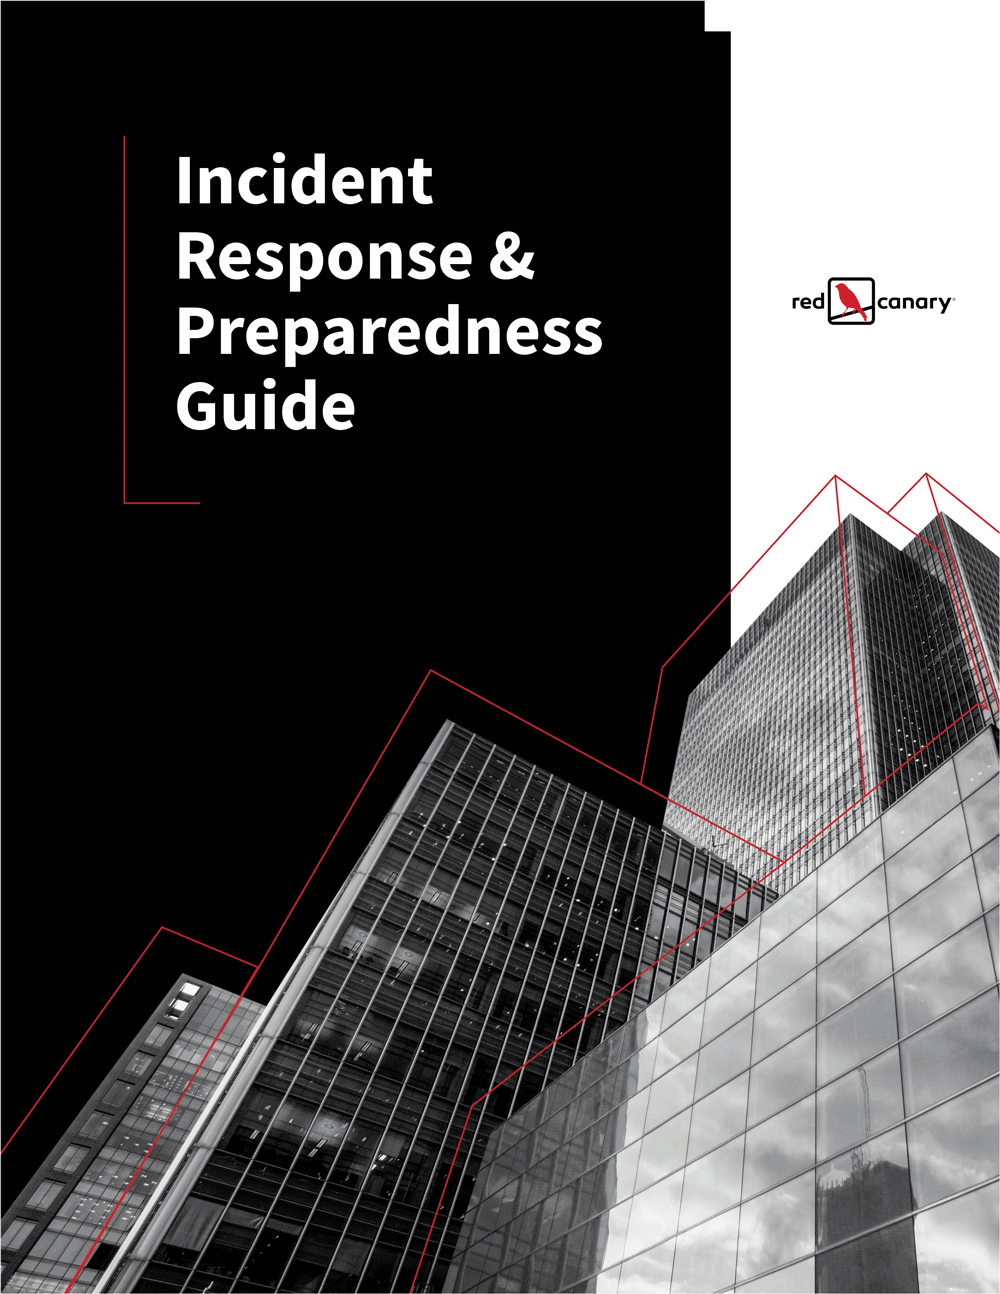 incident-response-planning-guide-templates-steps-procedures